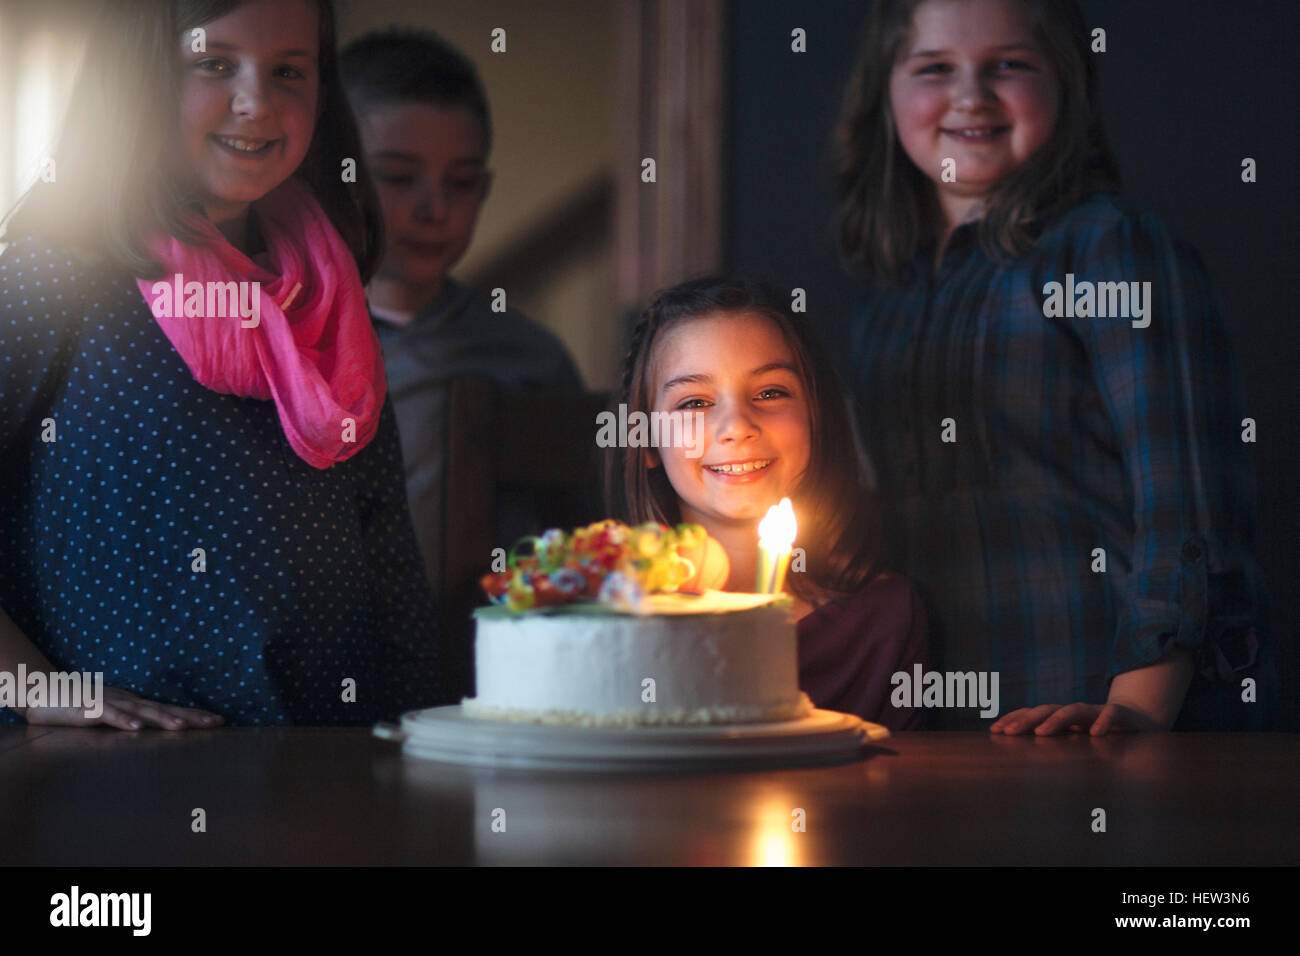 Girl with birthday cake surrounded by friends Stock Photo